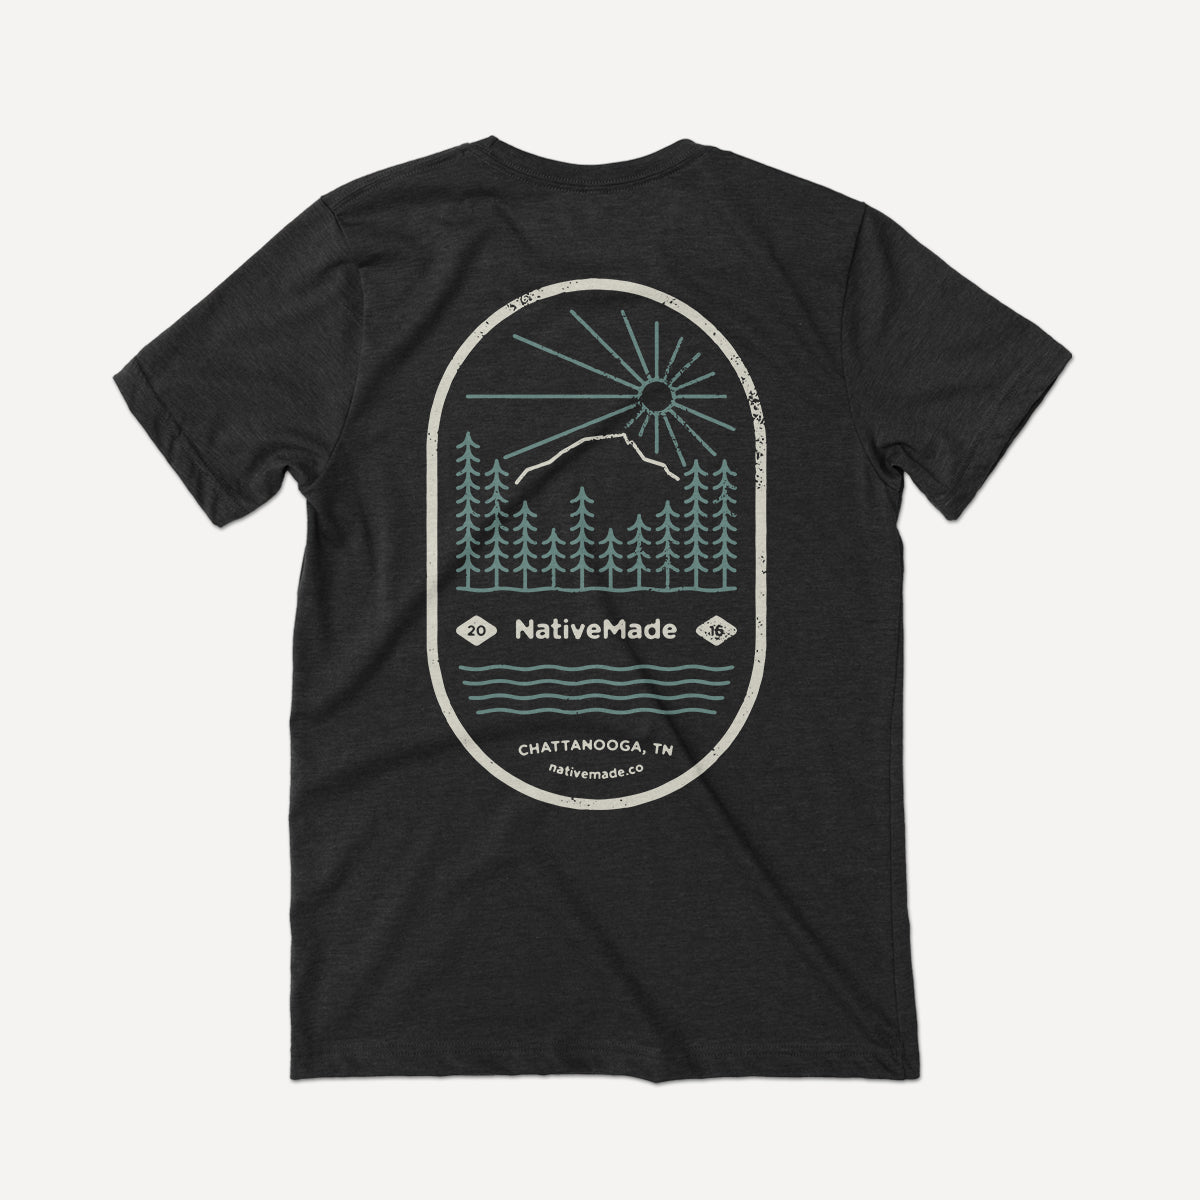 NativeMade Mountain T-shirt on a heather black Bella Canvas Tee